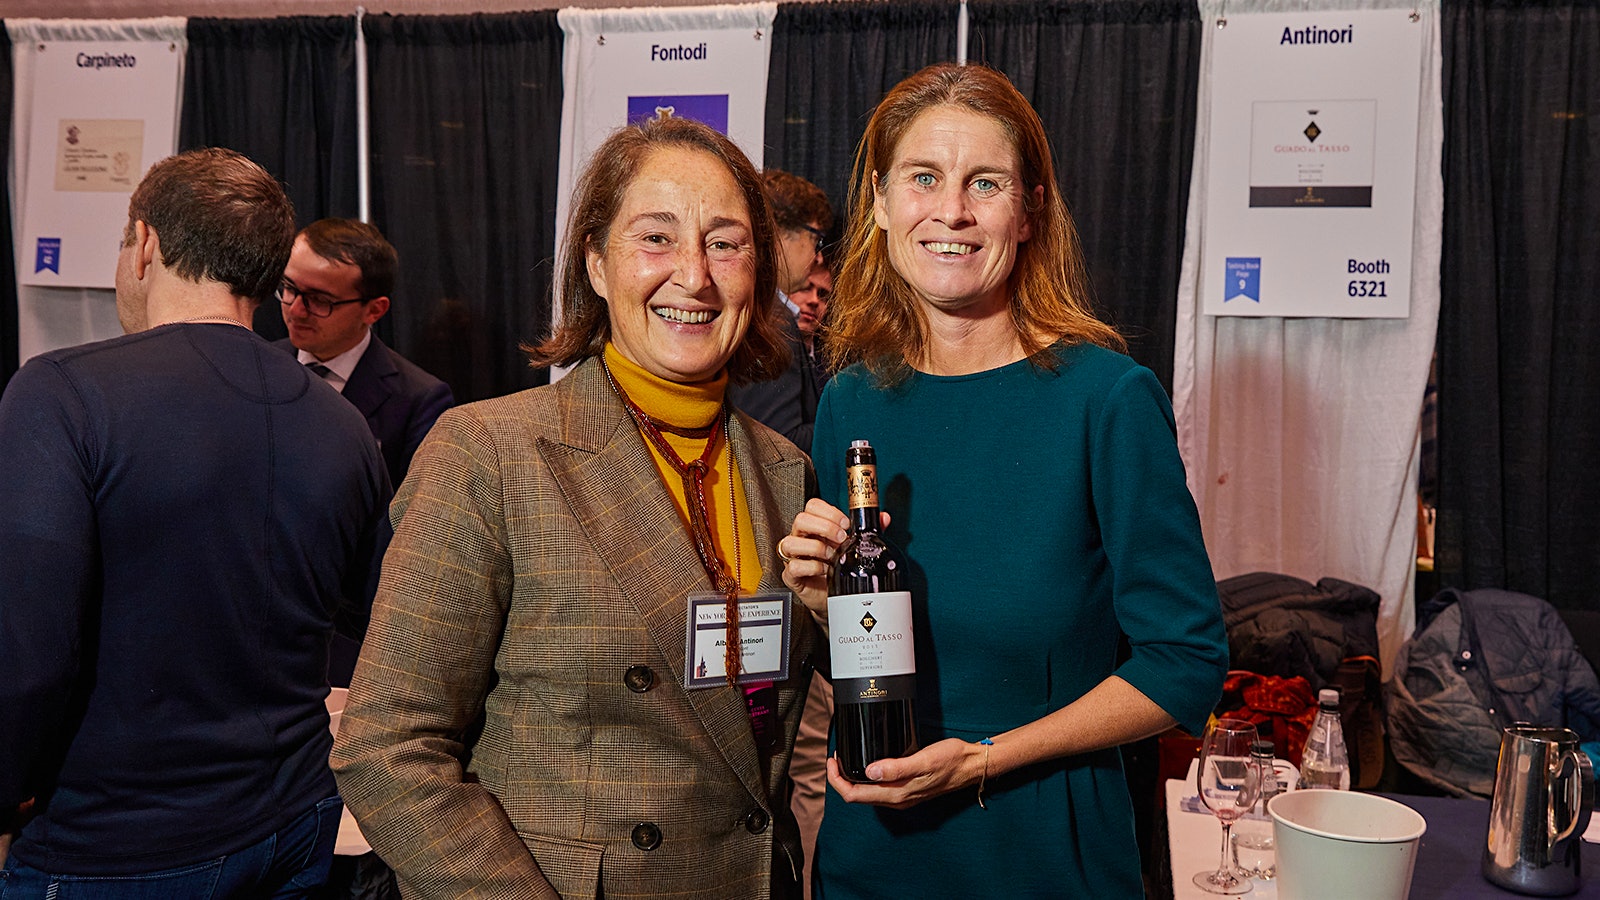  Antinori co-owners and sisters Albiera and Alessia at the 2022 New York Wine Experience